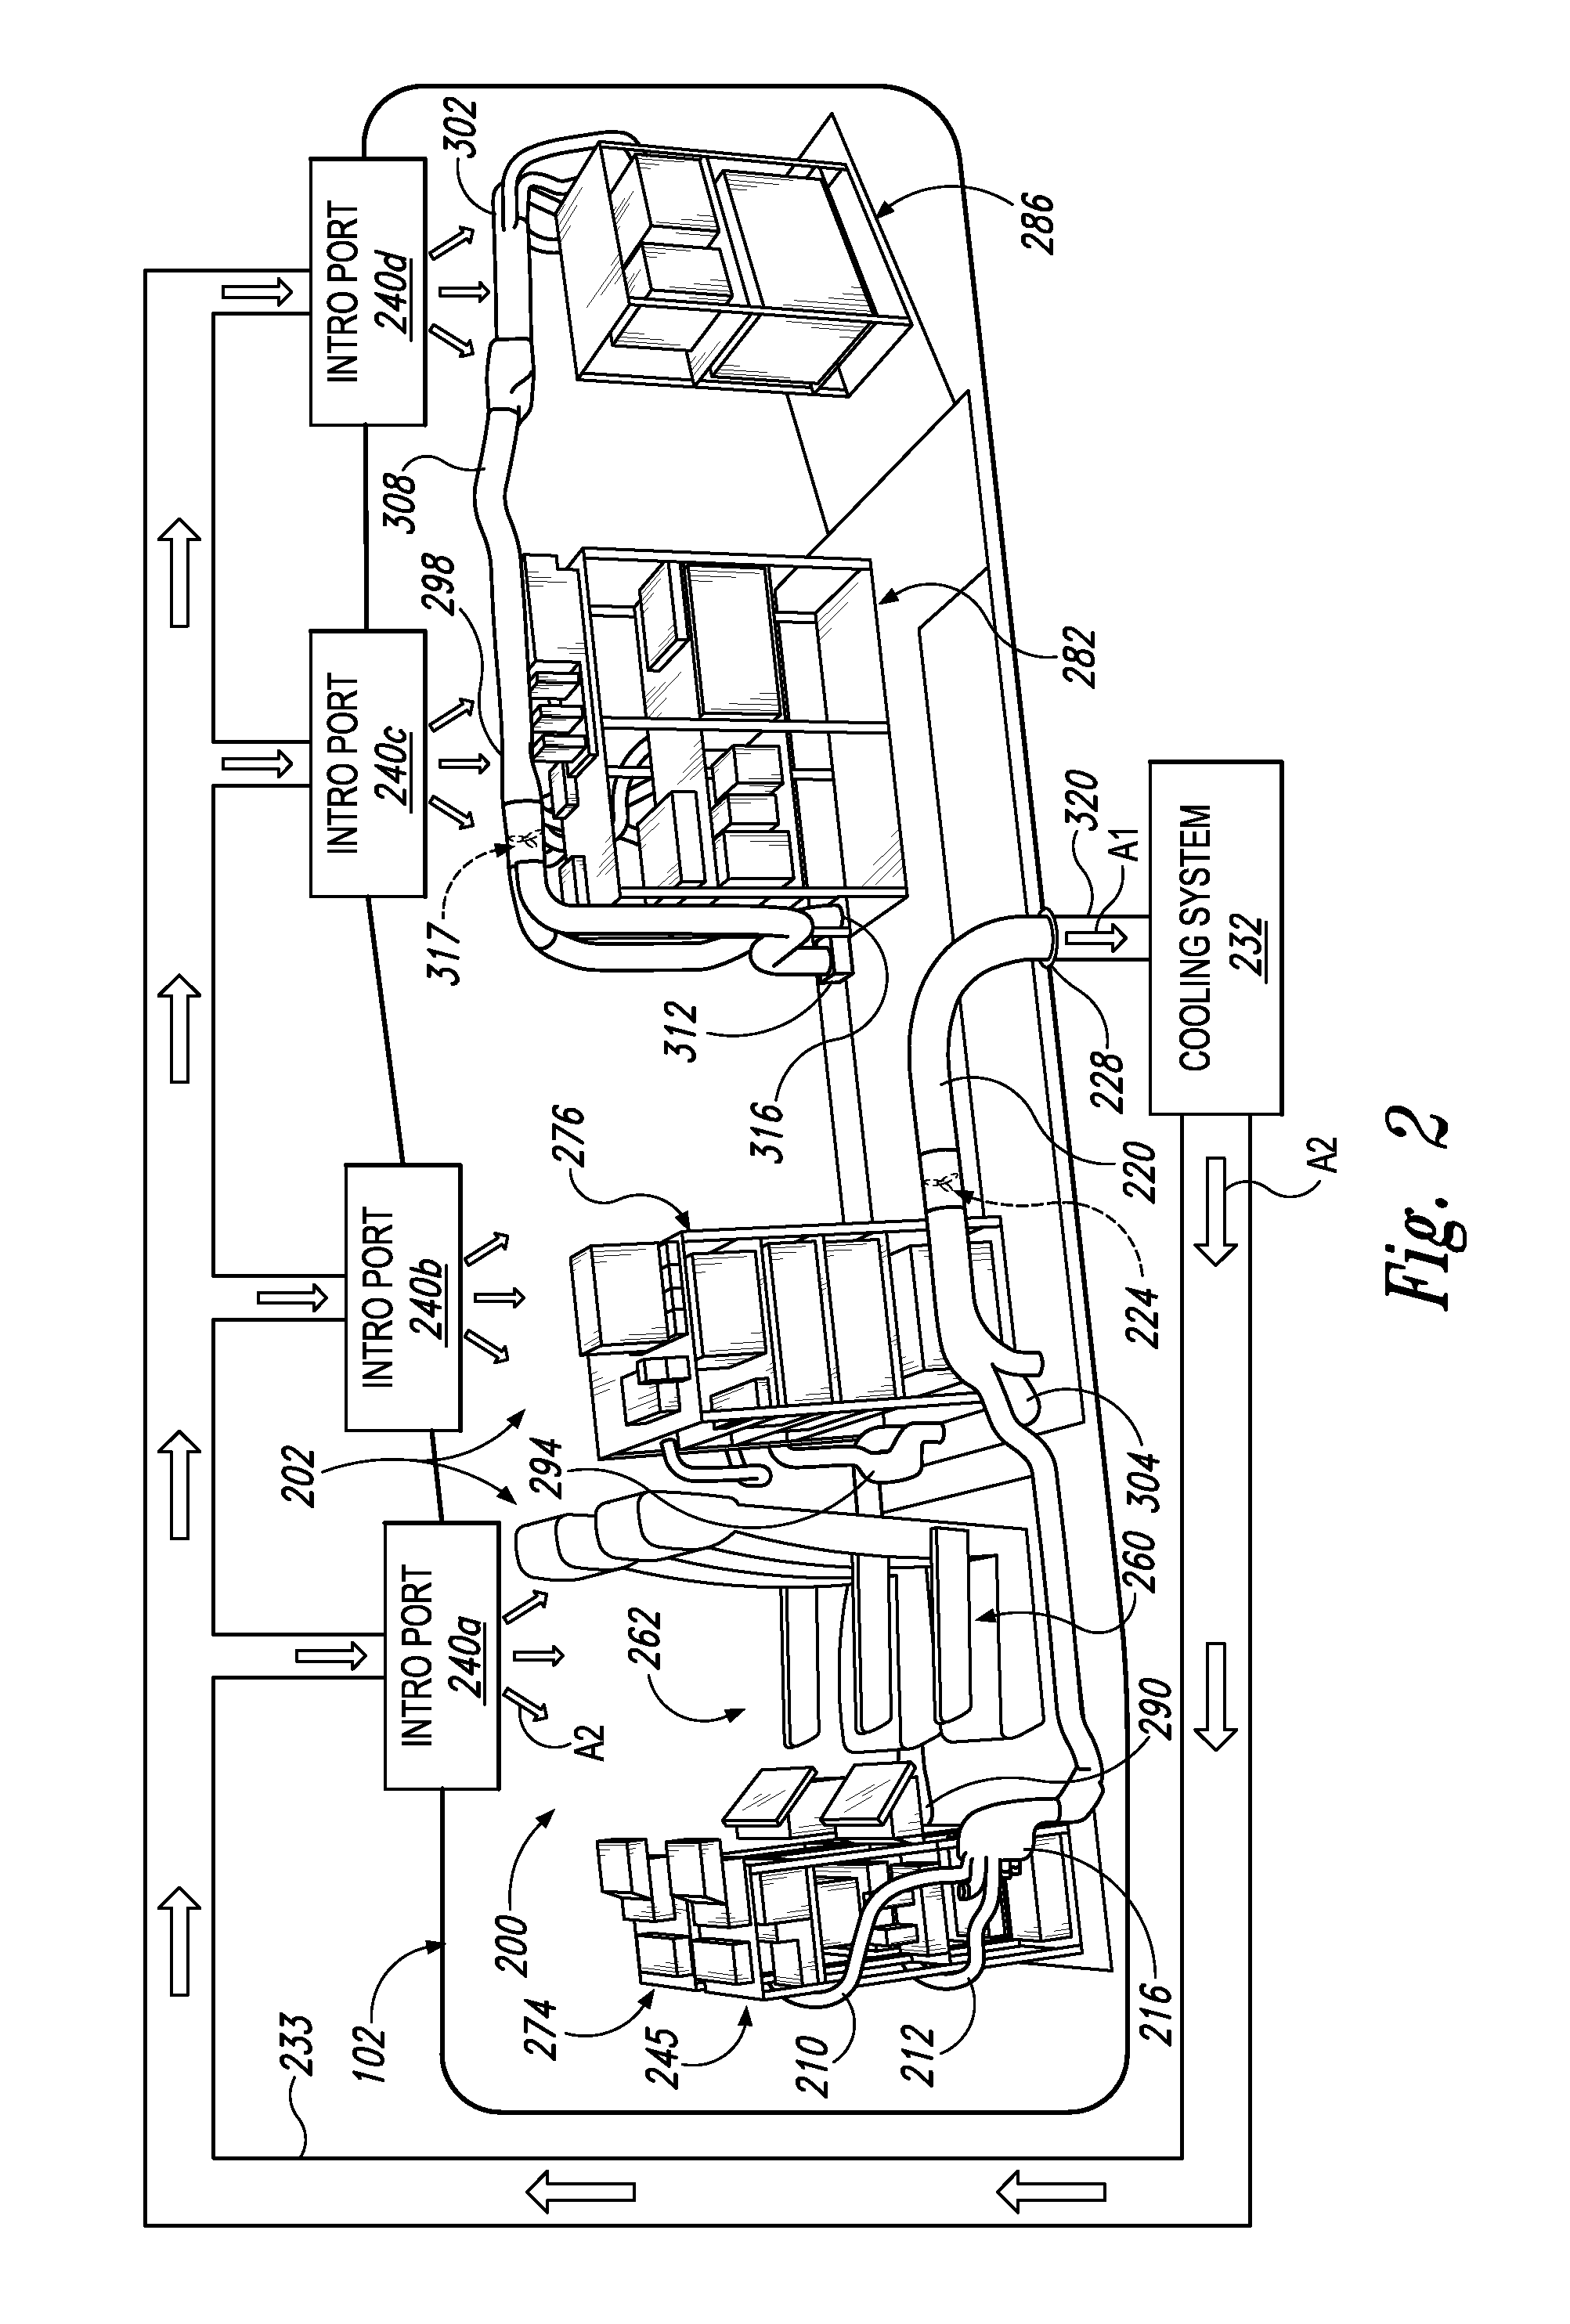 Mobile platform thermal management systems and methods